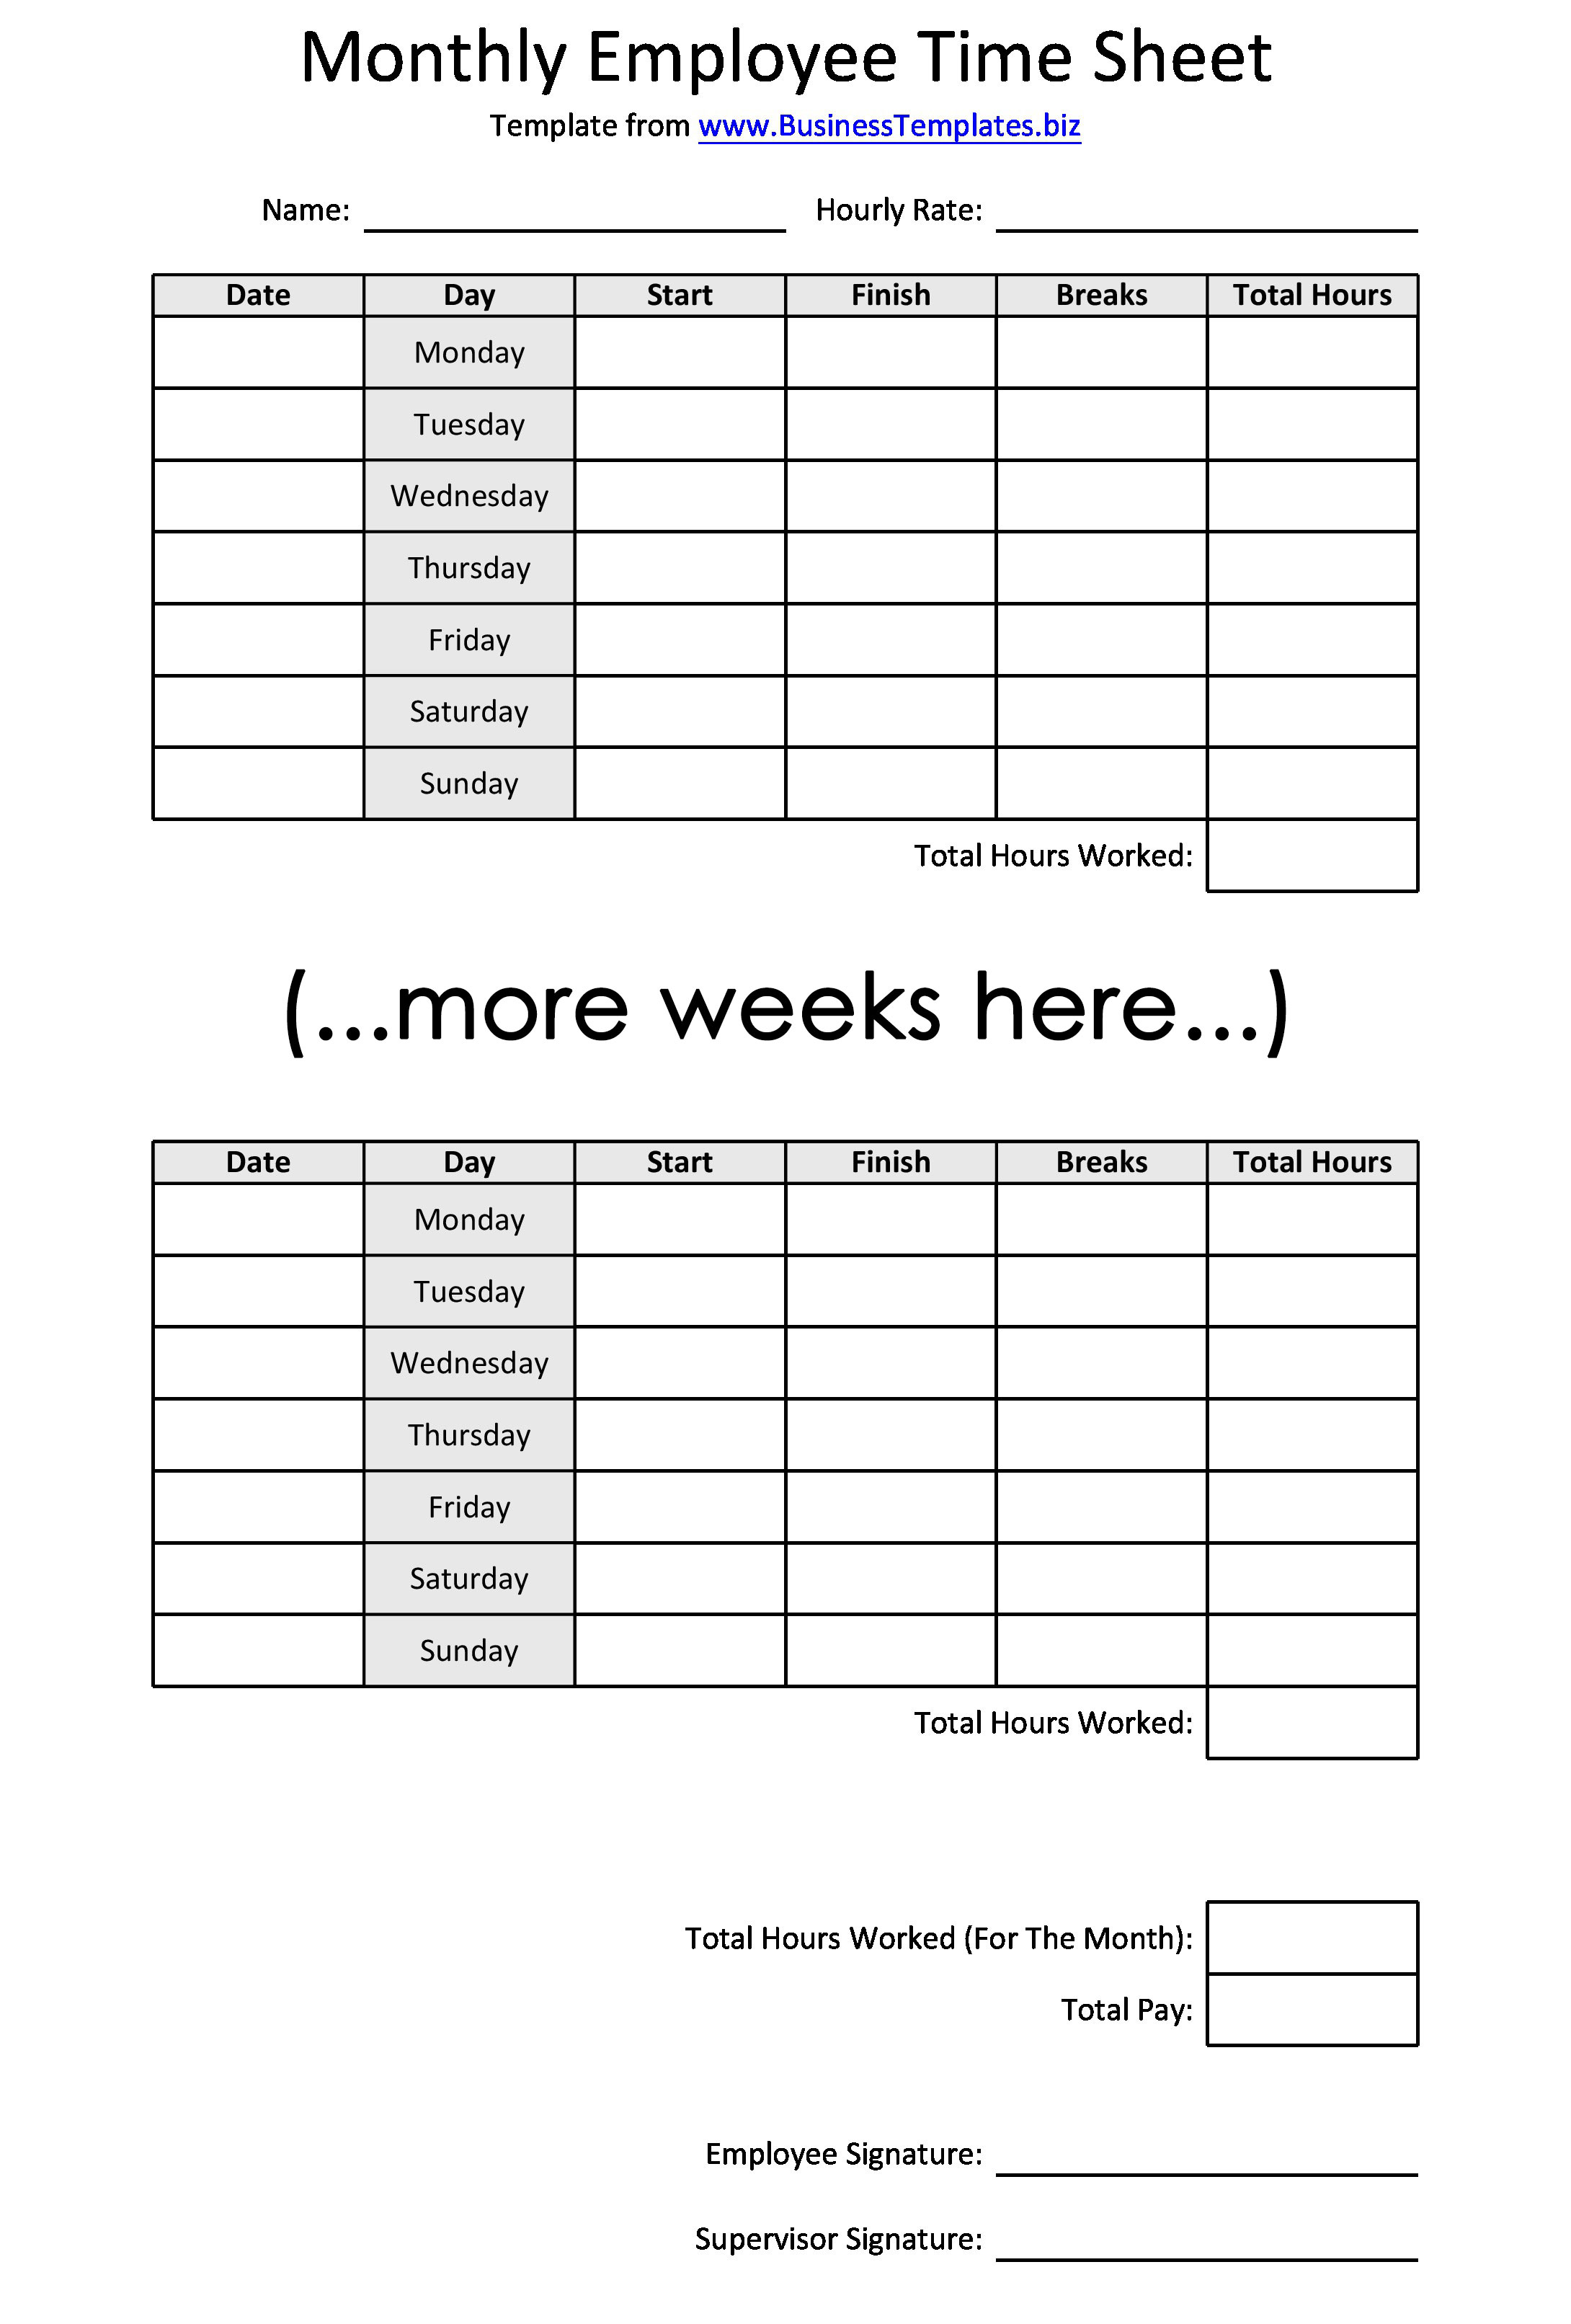 Monthly Employee Time Sheet